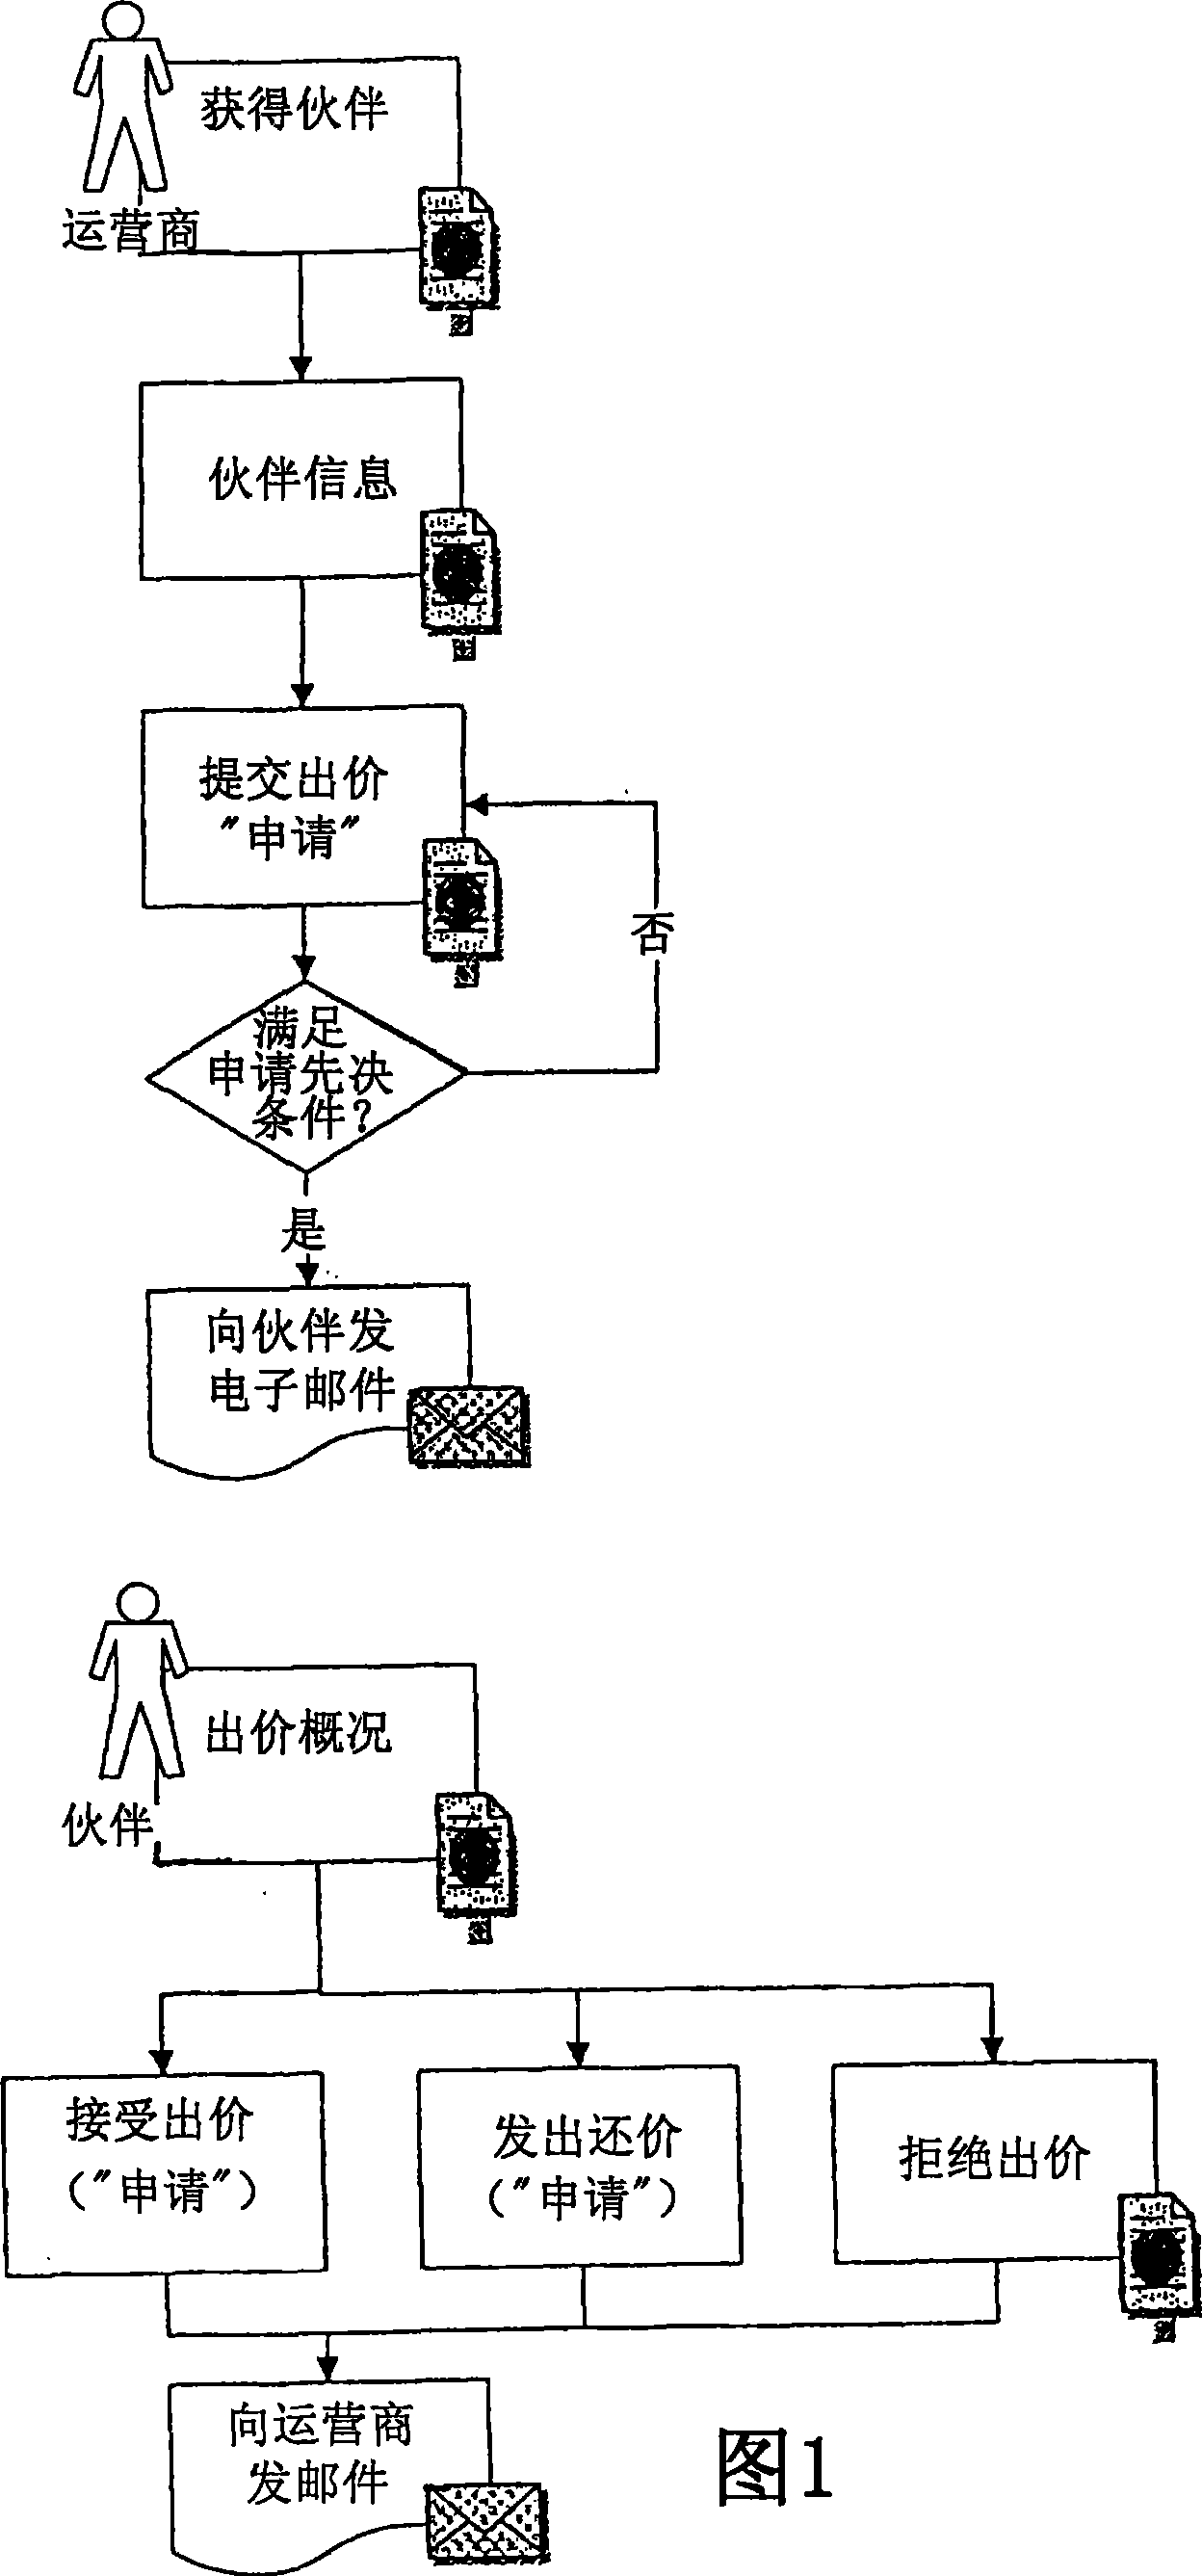 Method and system for evaluating an object or for withdrawing information from users